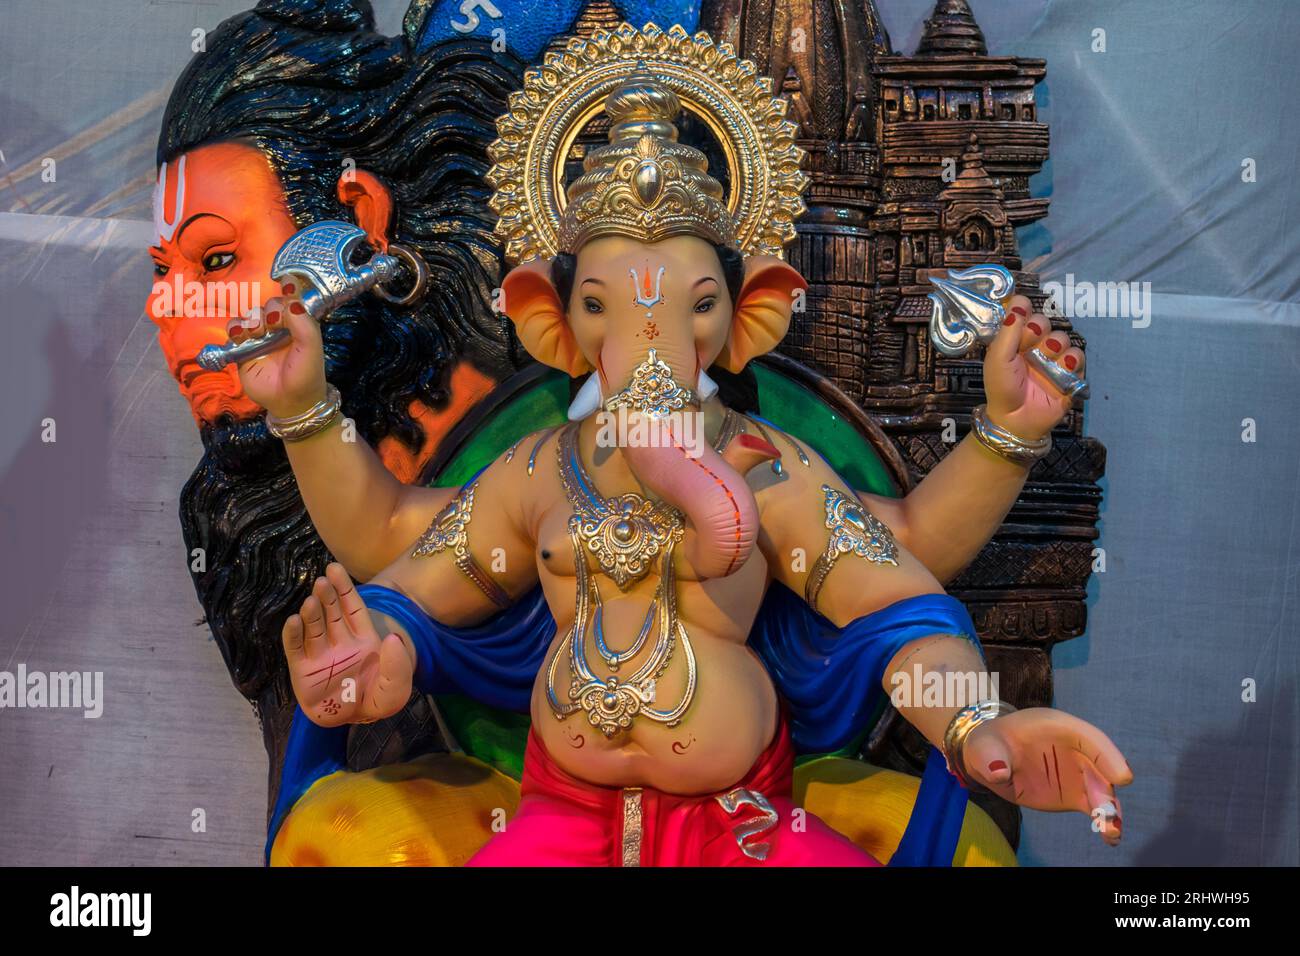 A beautiful idol of Lord Ganpati on display at a workshop in Mumbai, India for the festival of Ganesh Chaturthi Stock Photo